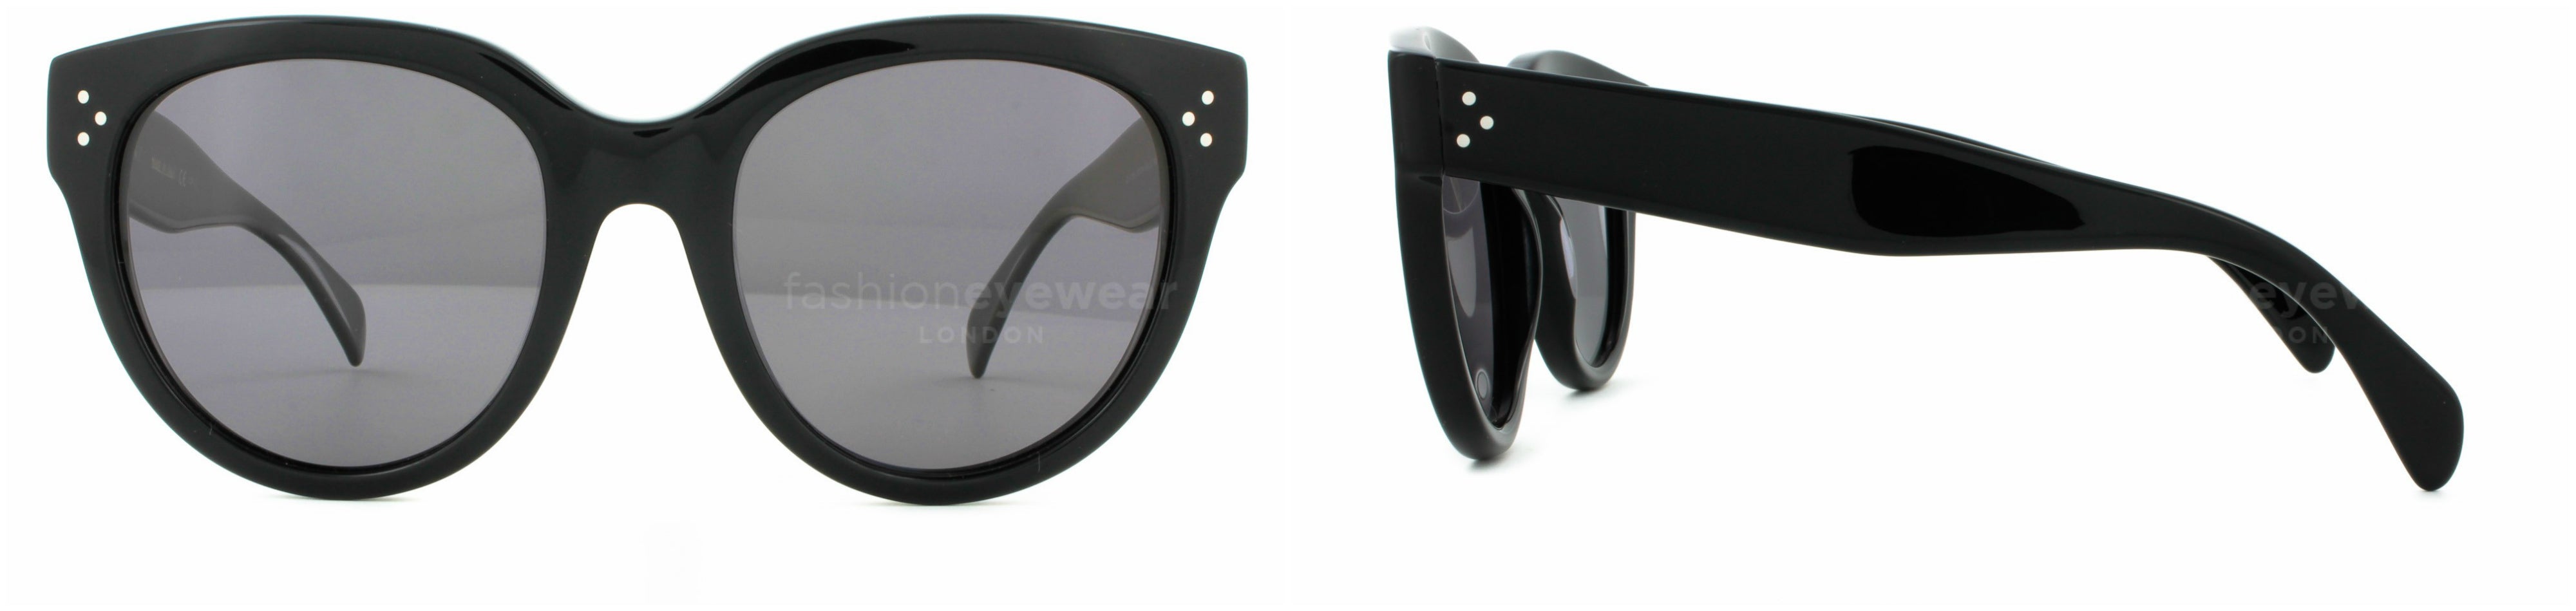 Celine Audrey Sunglasses The Must-have Accessory for Autumn/Winter – Fashion Eyewear